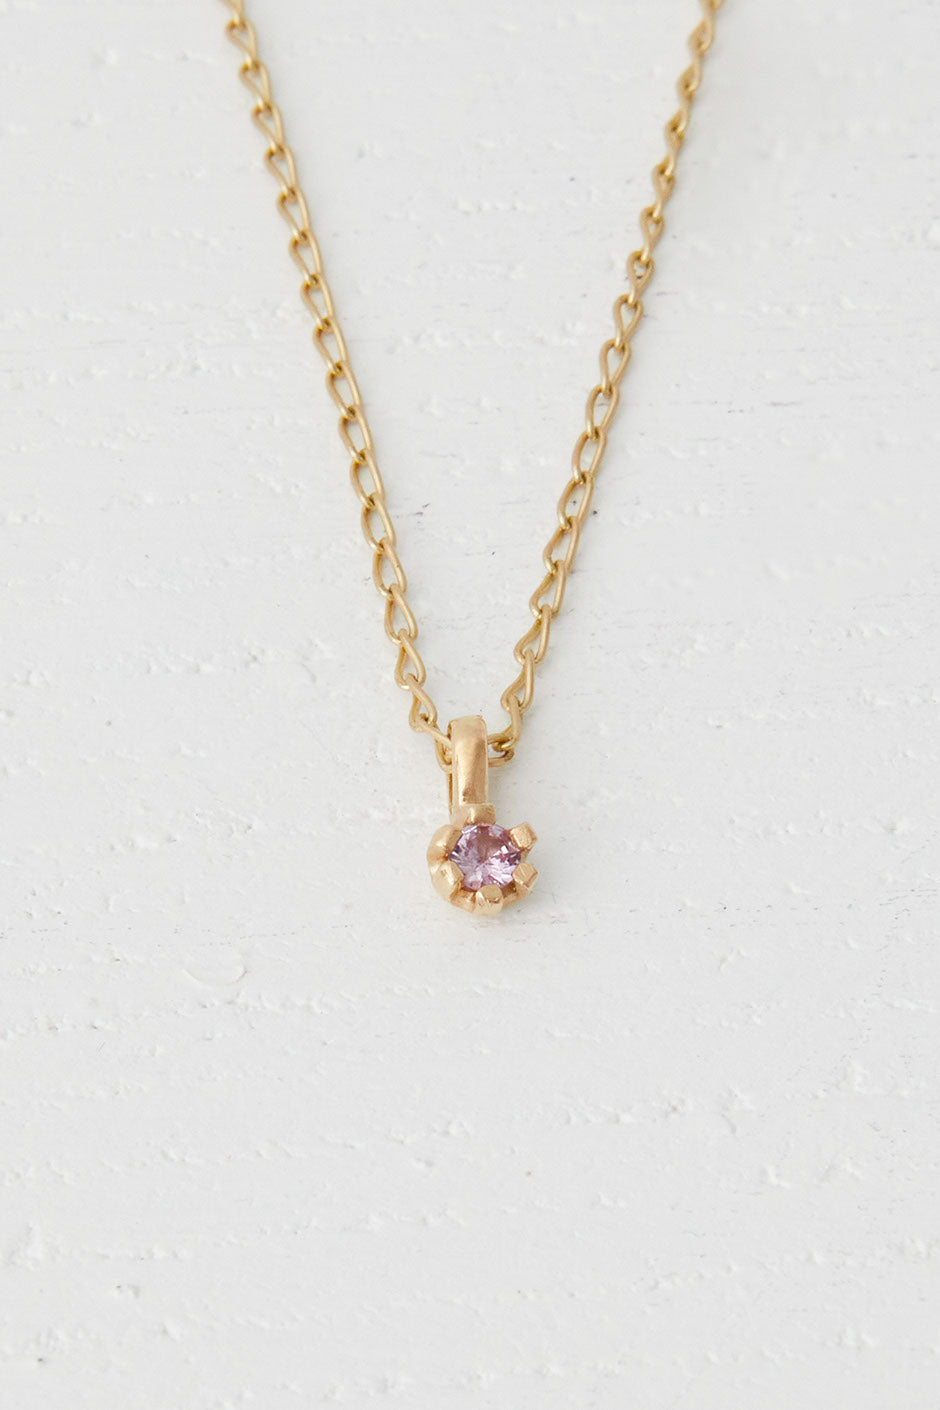 Pink Sapphire Pendant and Fine Cable Chain